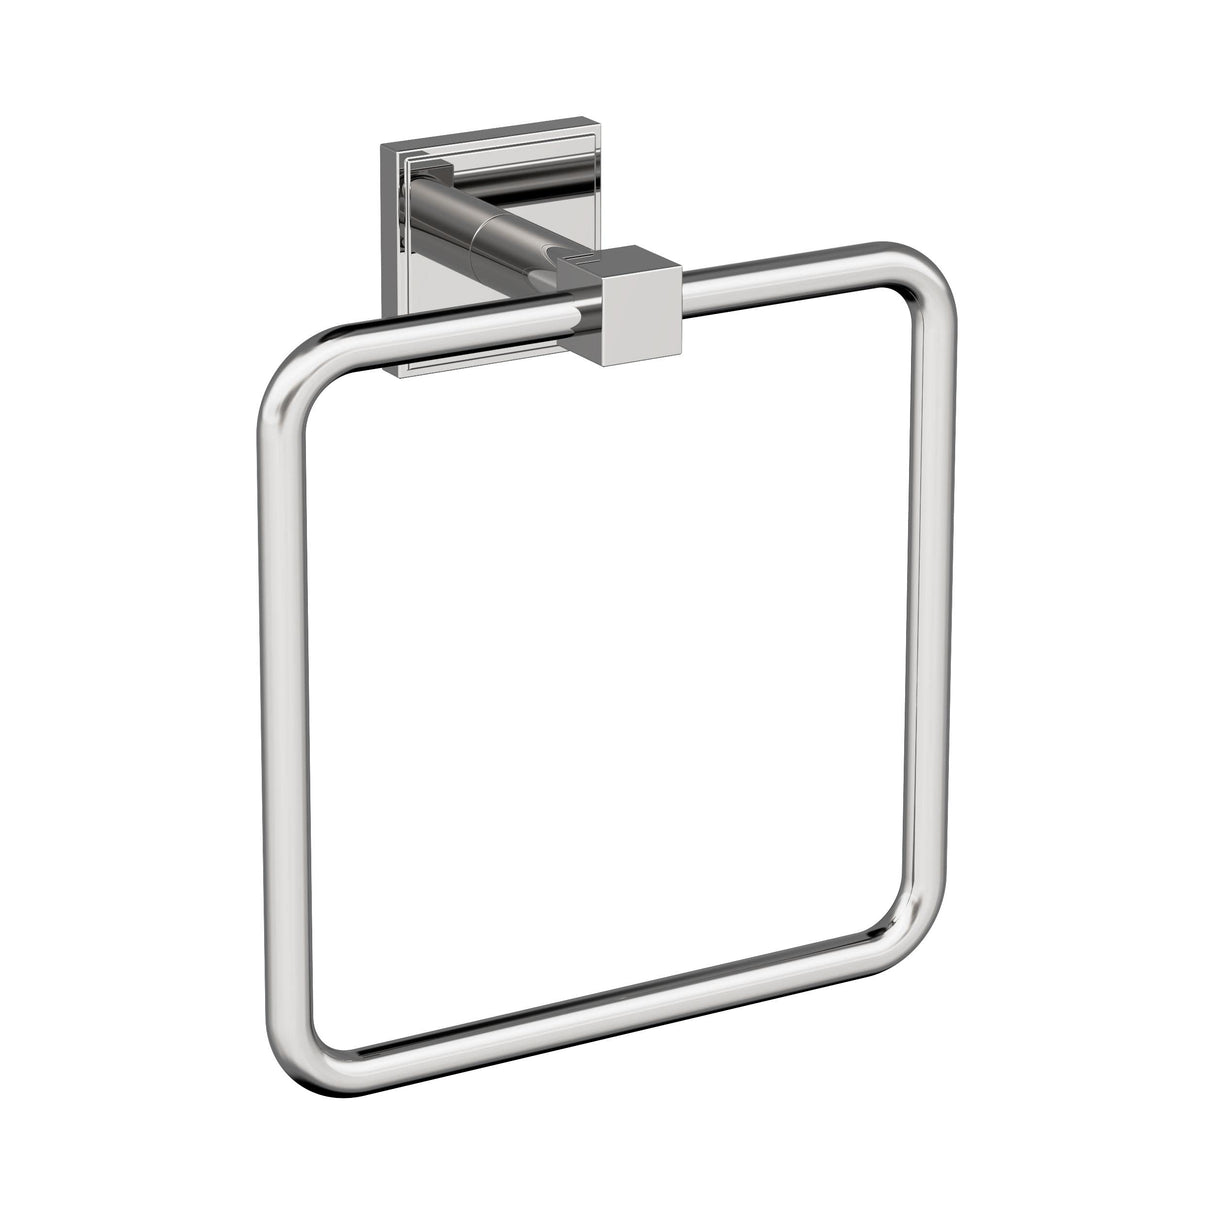 Amerock BH3607226 Chrome Towel Ring 7-1/16 in (179 mm) Length Towel Holder Appoint Hand Towel Holder for Bathroom Wall Small Kitchen Towel Holder Bath Accessories